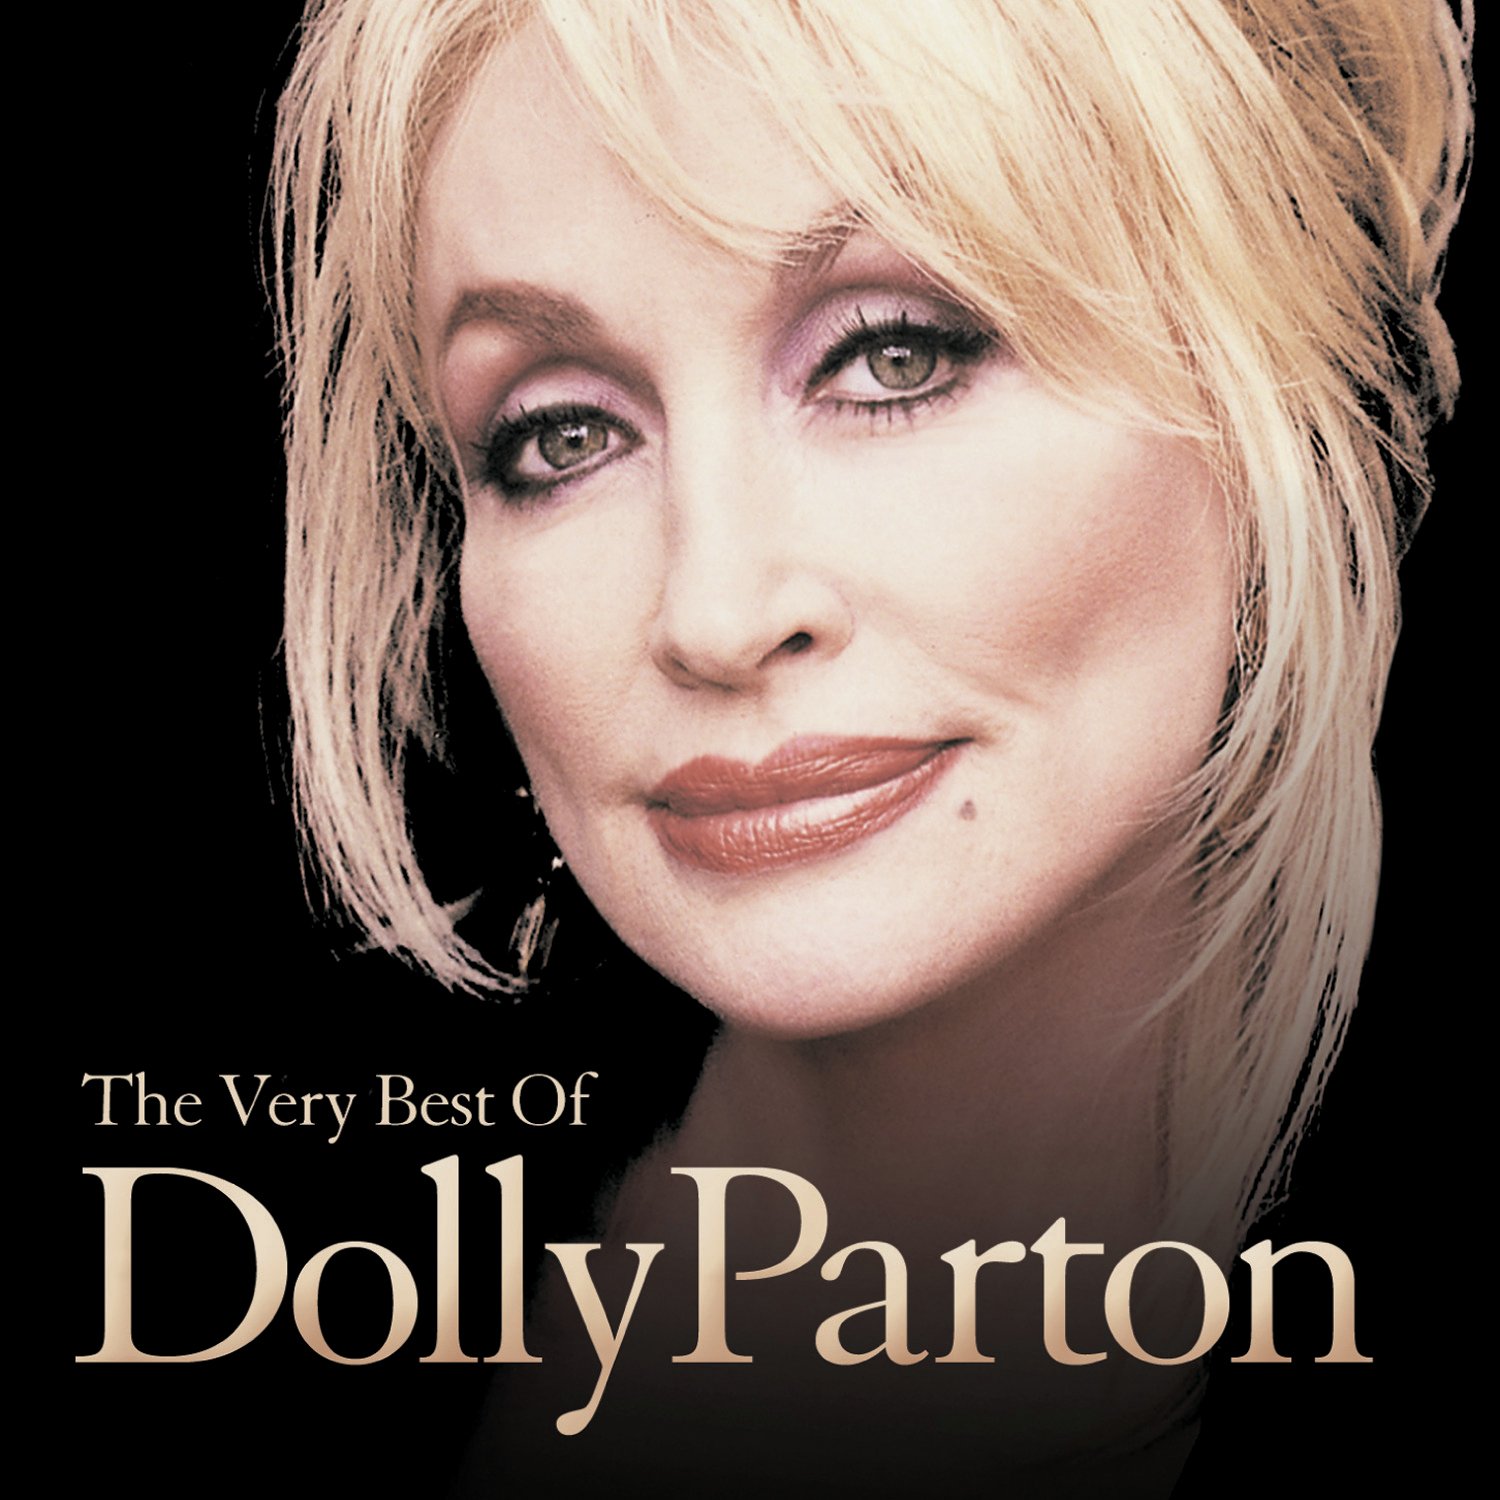 The Very Best of Dolly Parton Vinyl Review